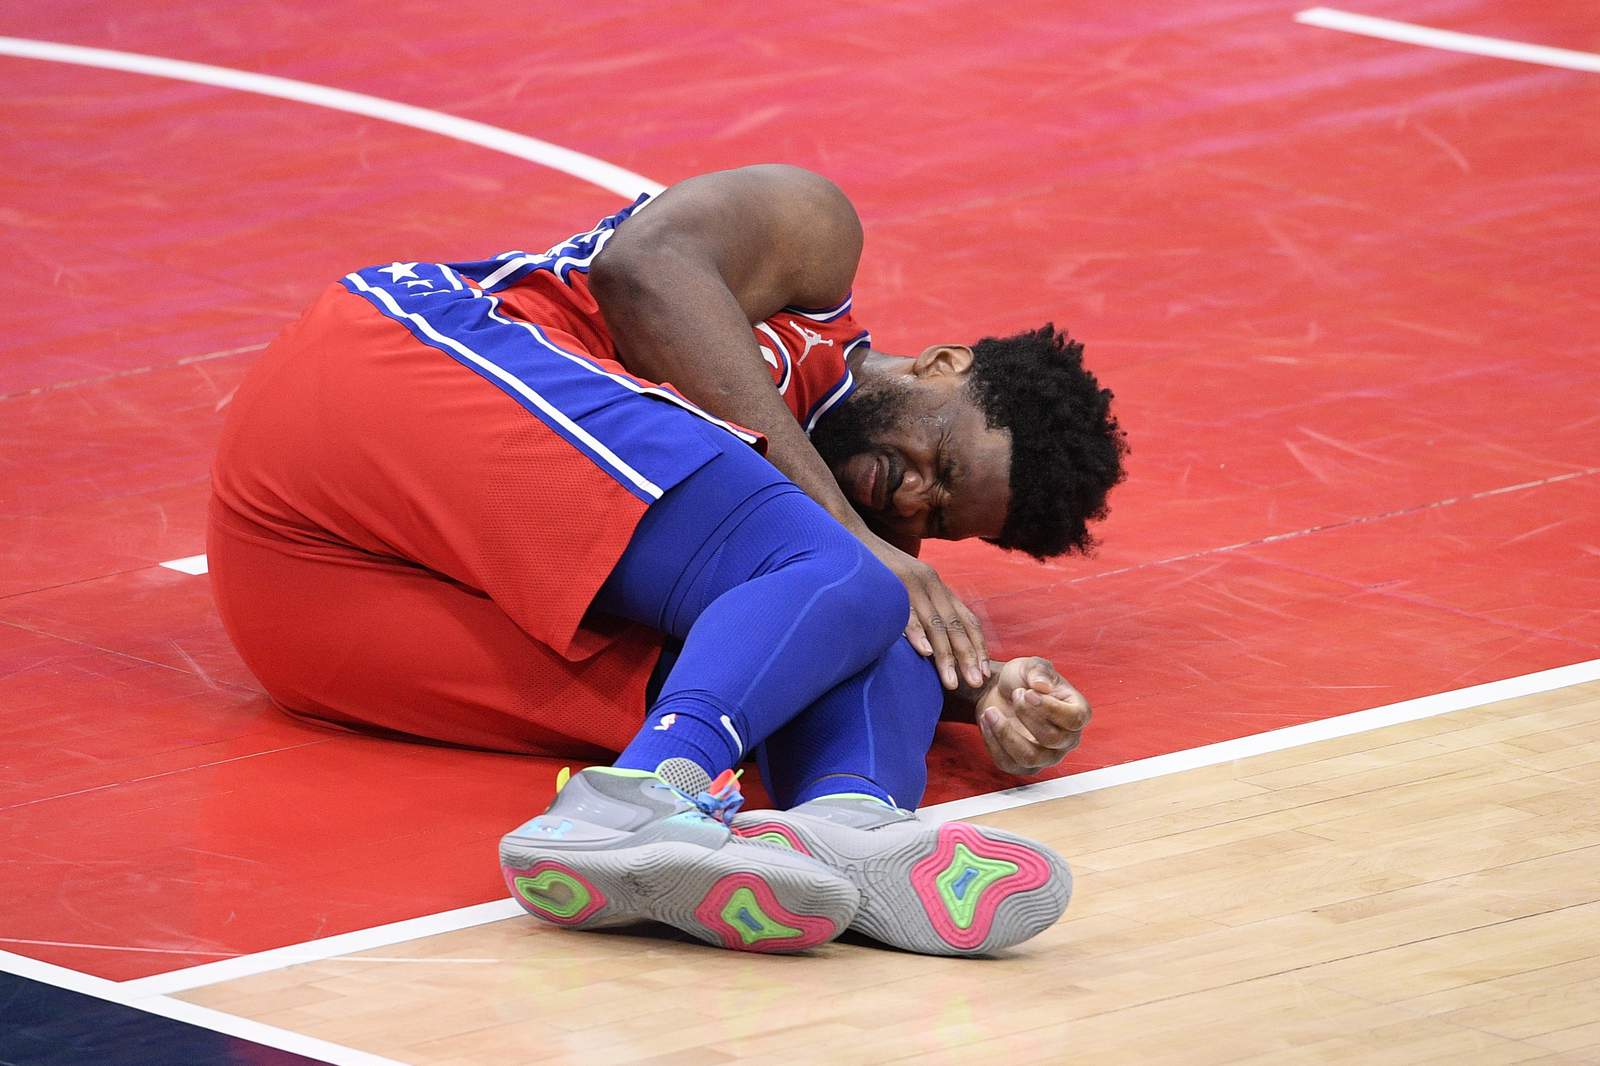 AP source: Embiid could miss up to 2 weeks with knee injury